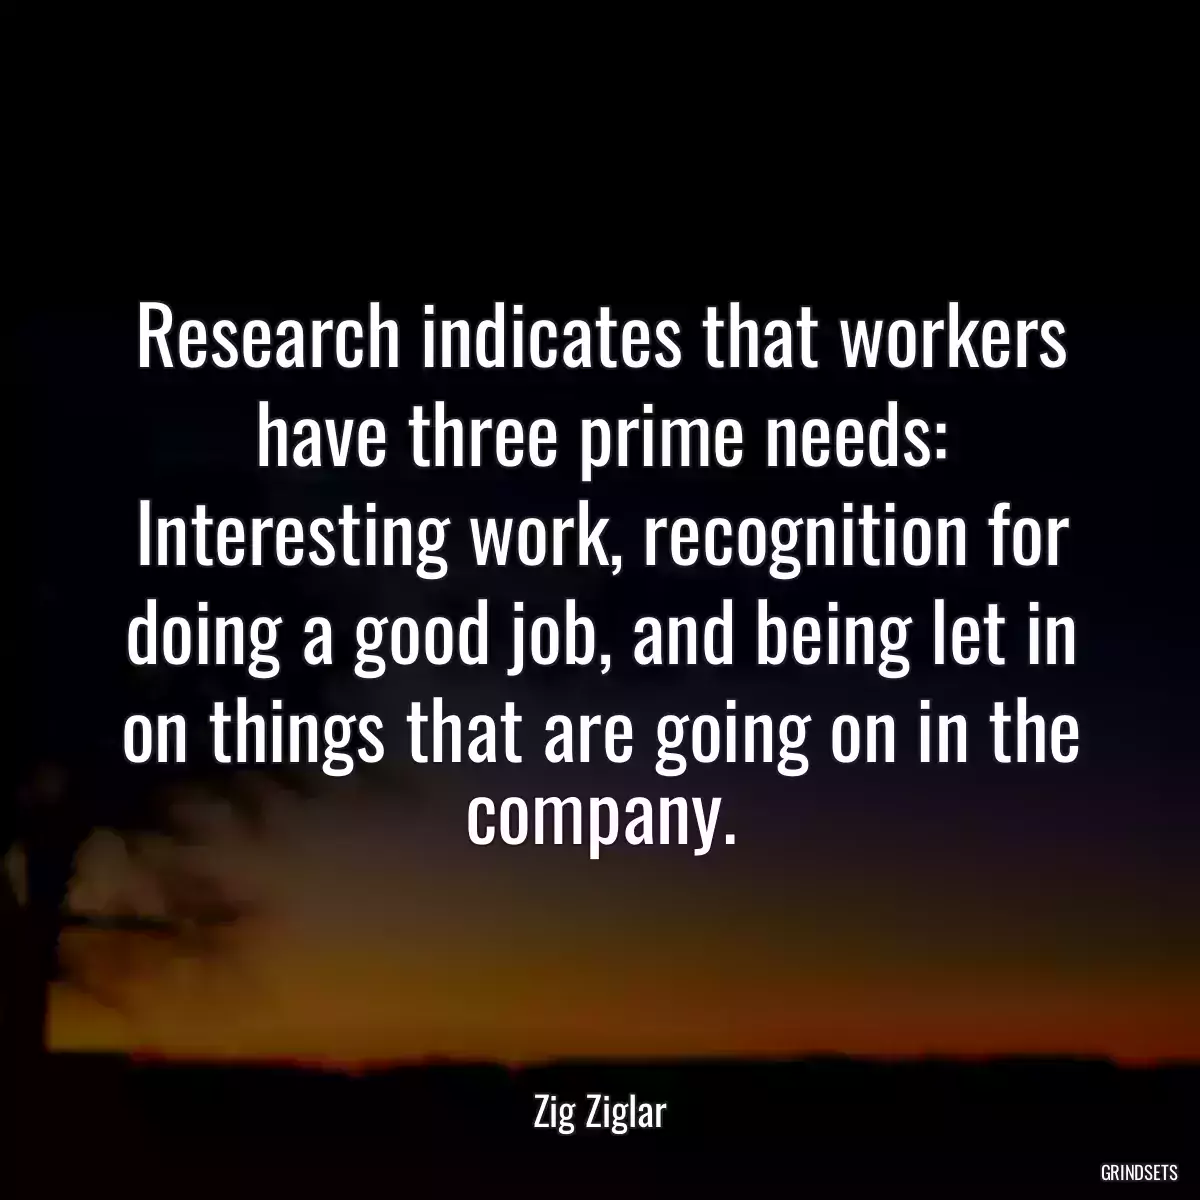 Research indicates that workers have three prime needs: Interesting work, recognition for doing a good job, and being let in on things that are going on in the company.